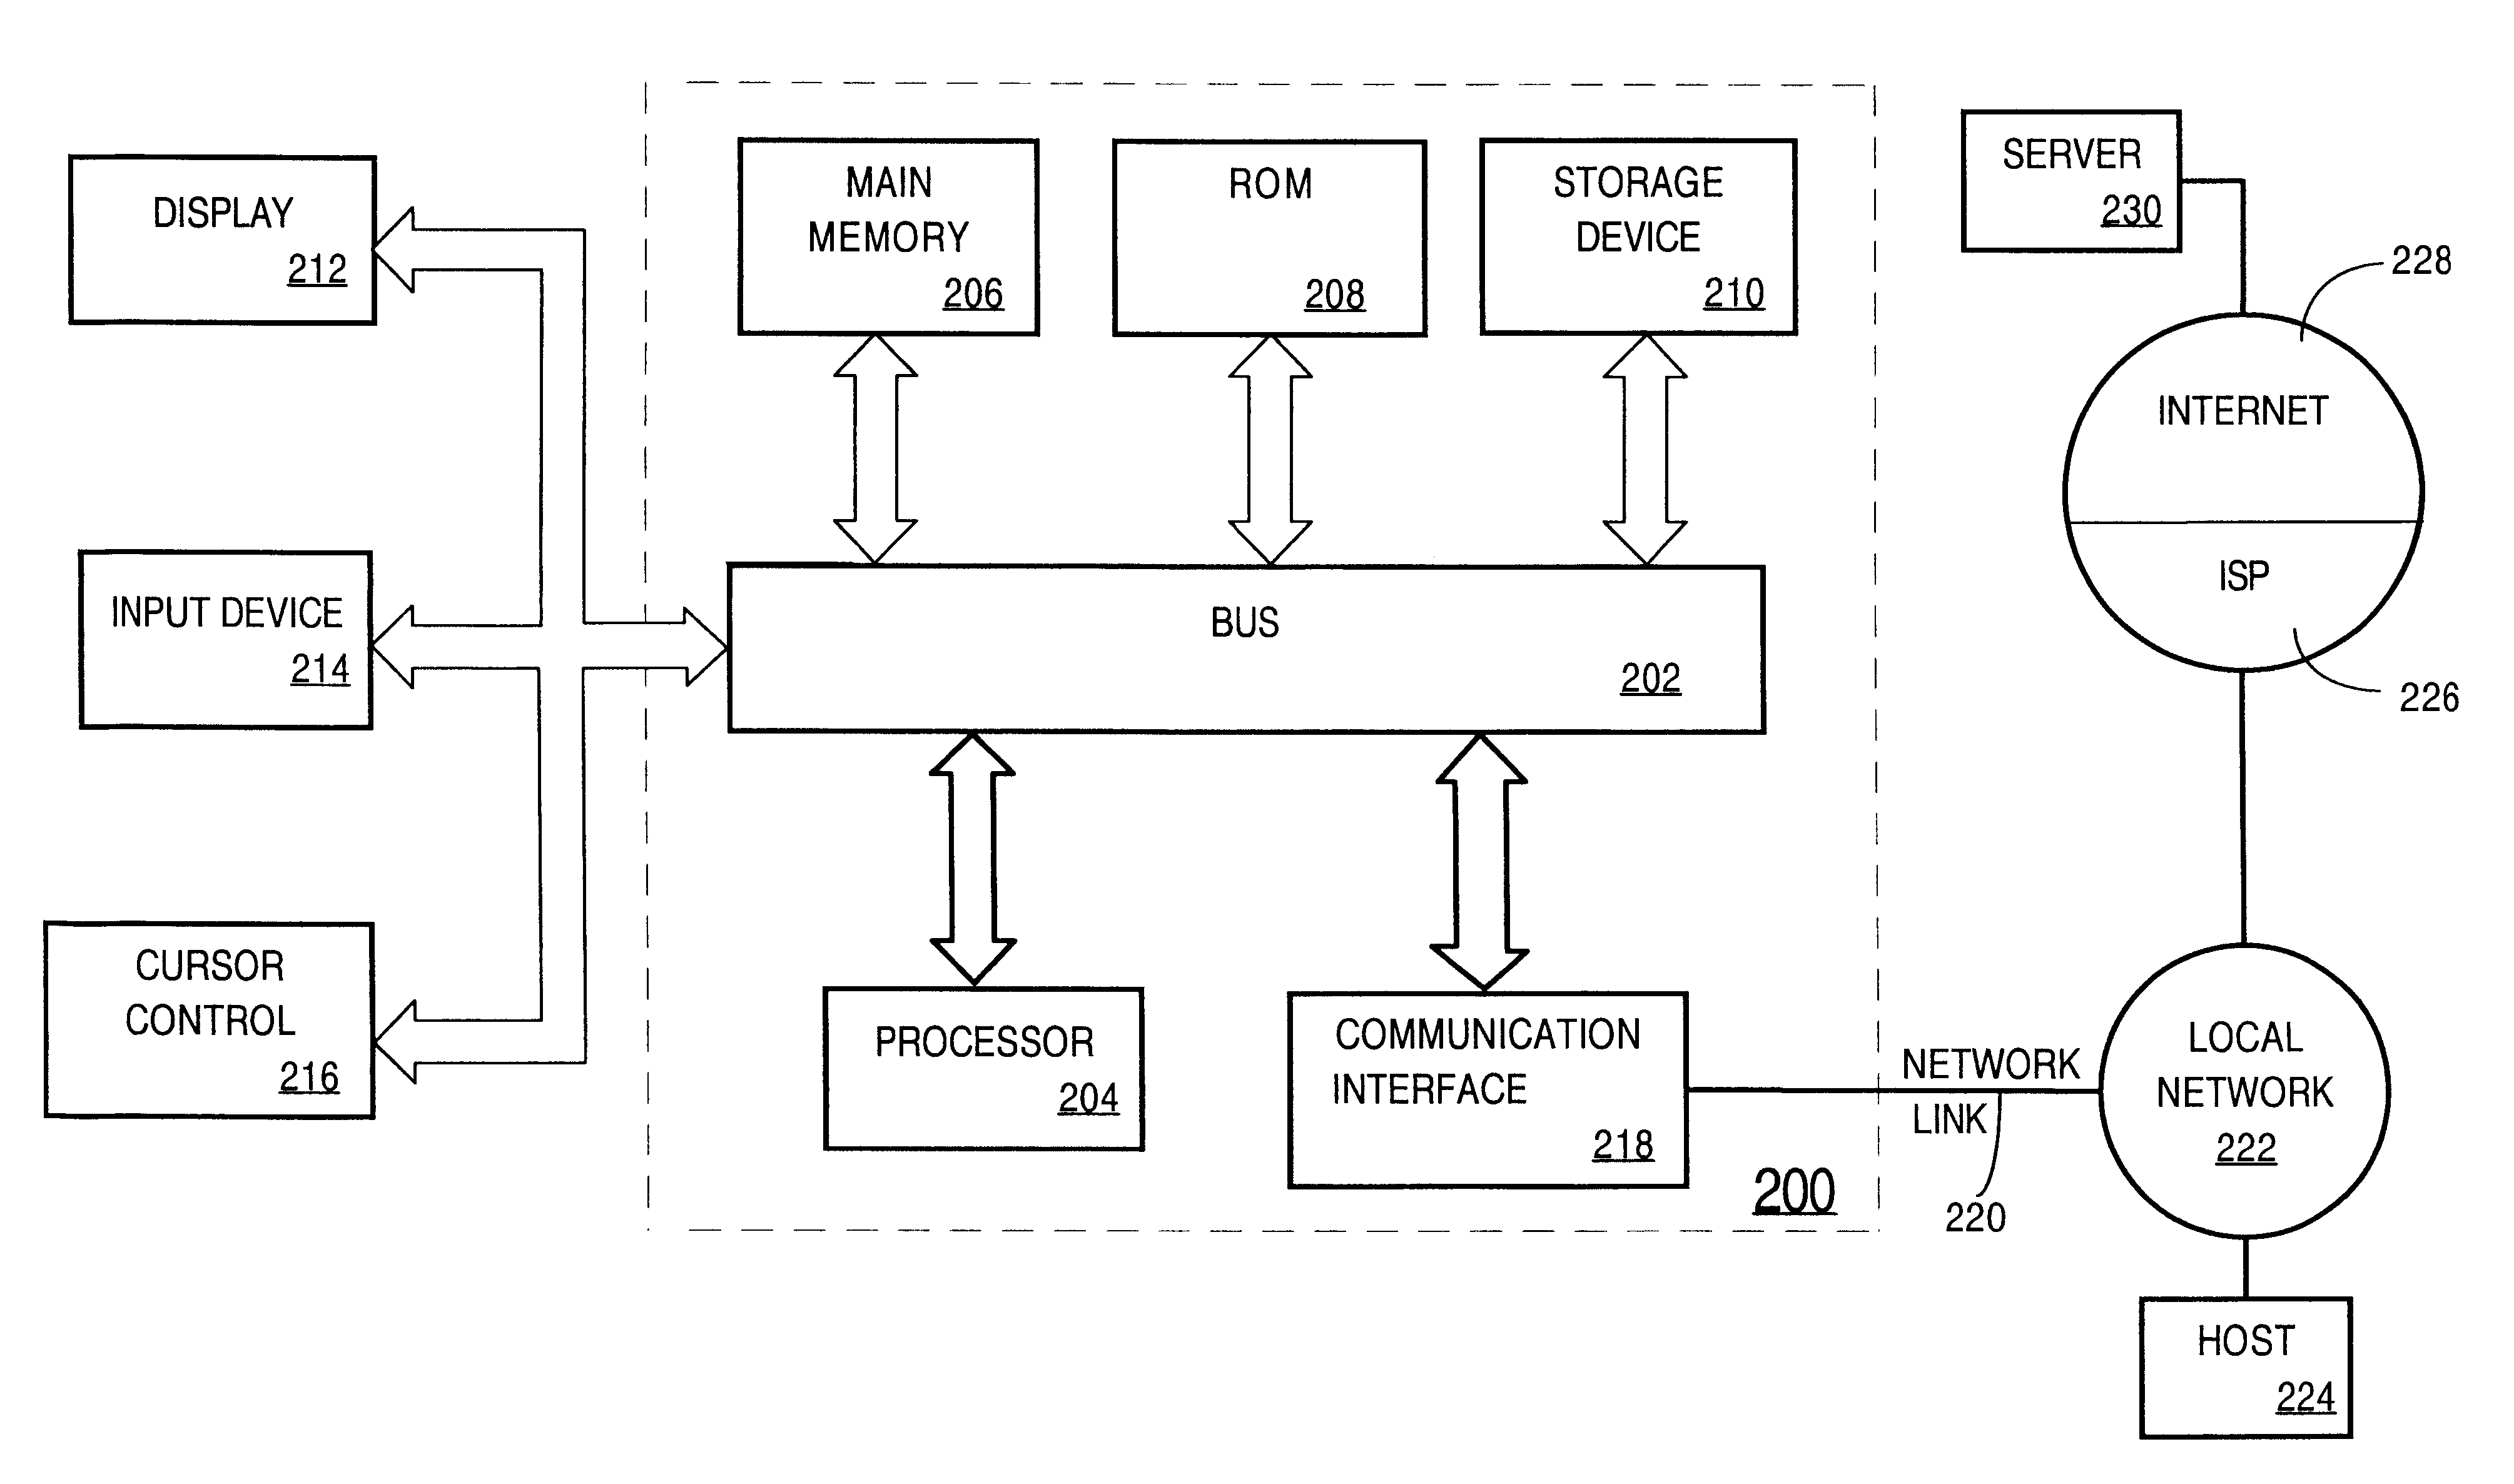 Apparatus and method for mapping relational data and metadata to XML